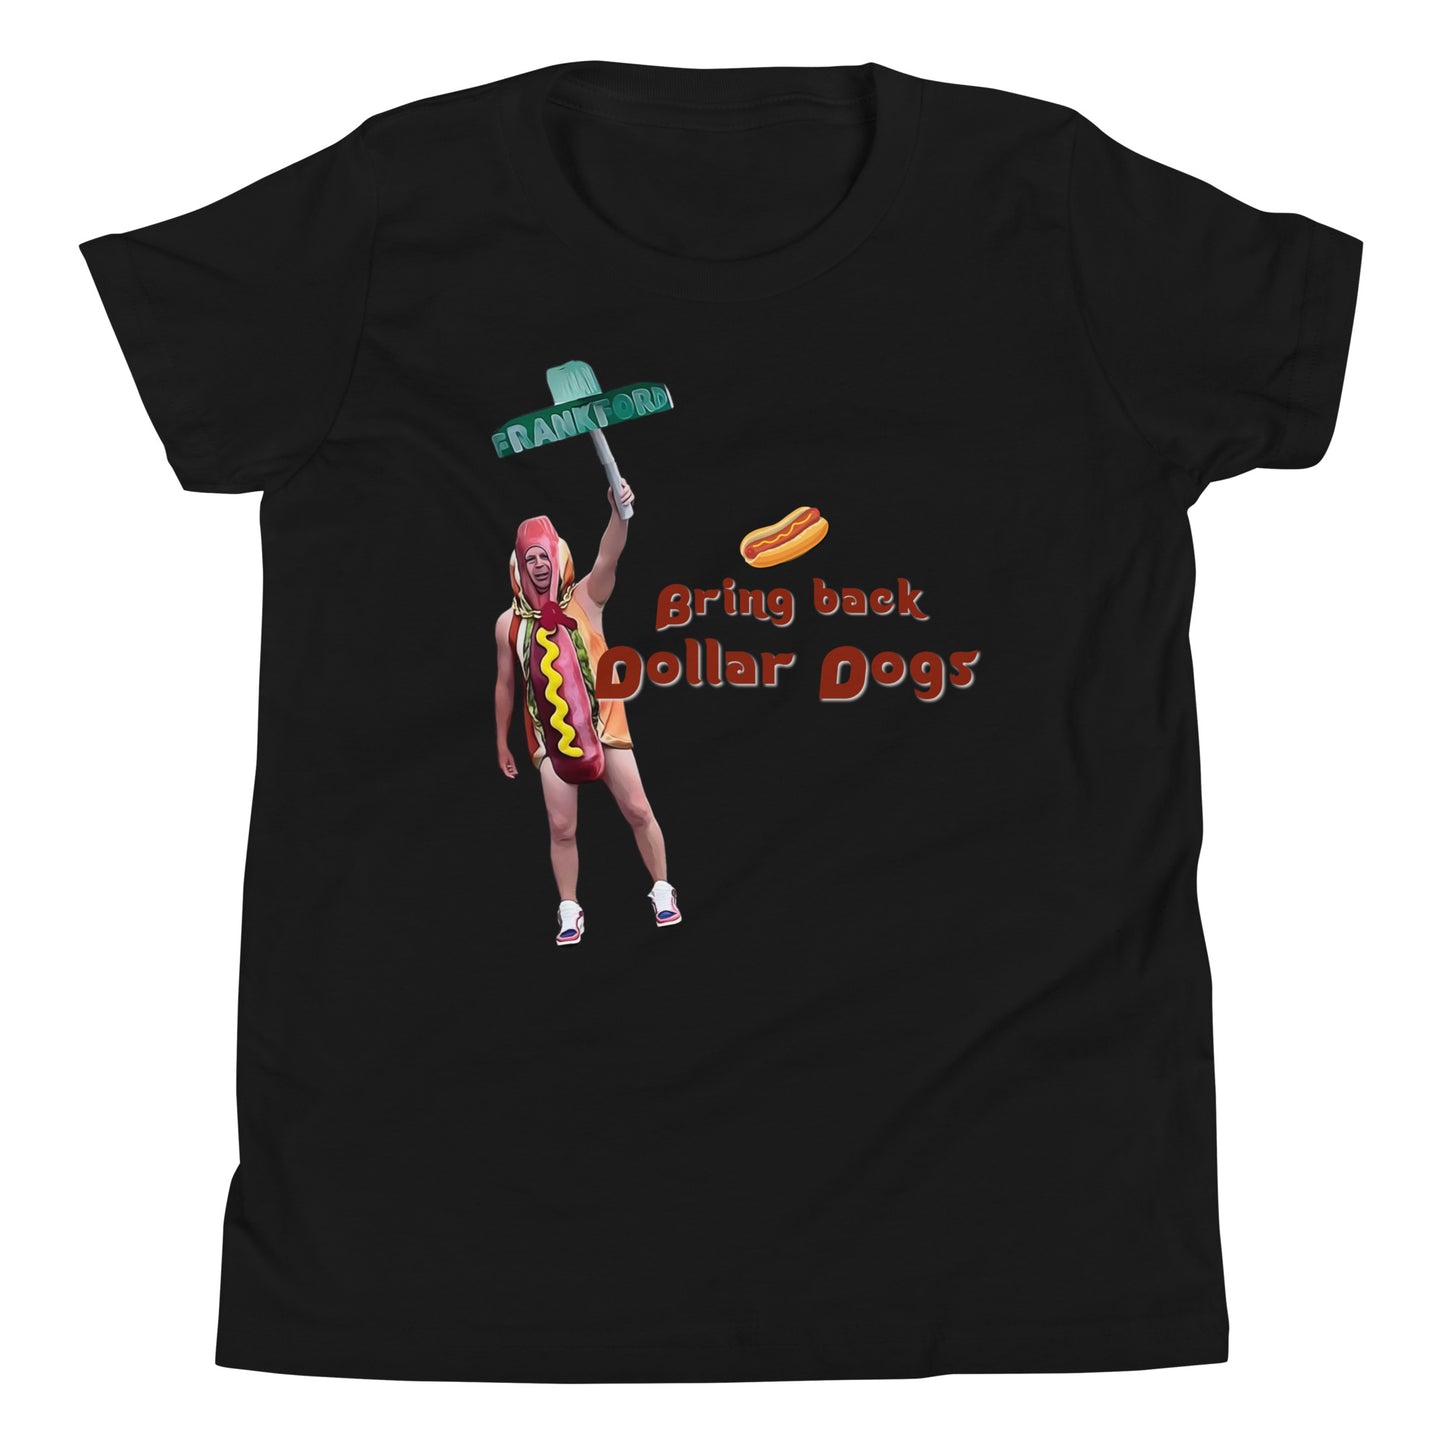 Bring Back Dollar Dogs - Youth Tee